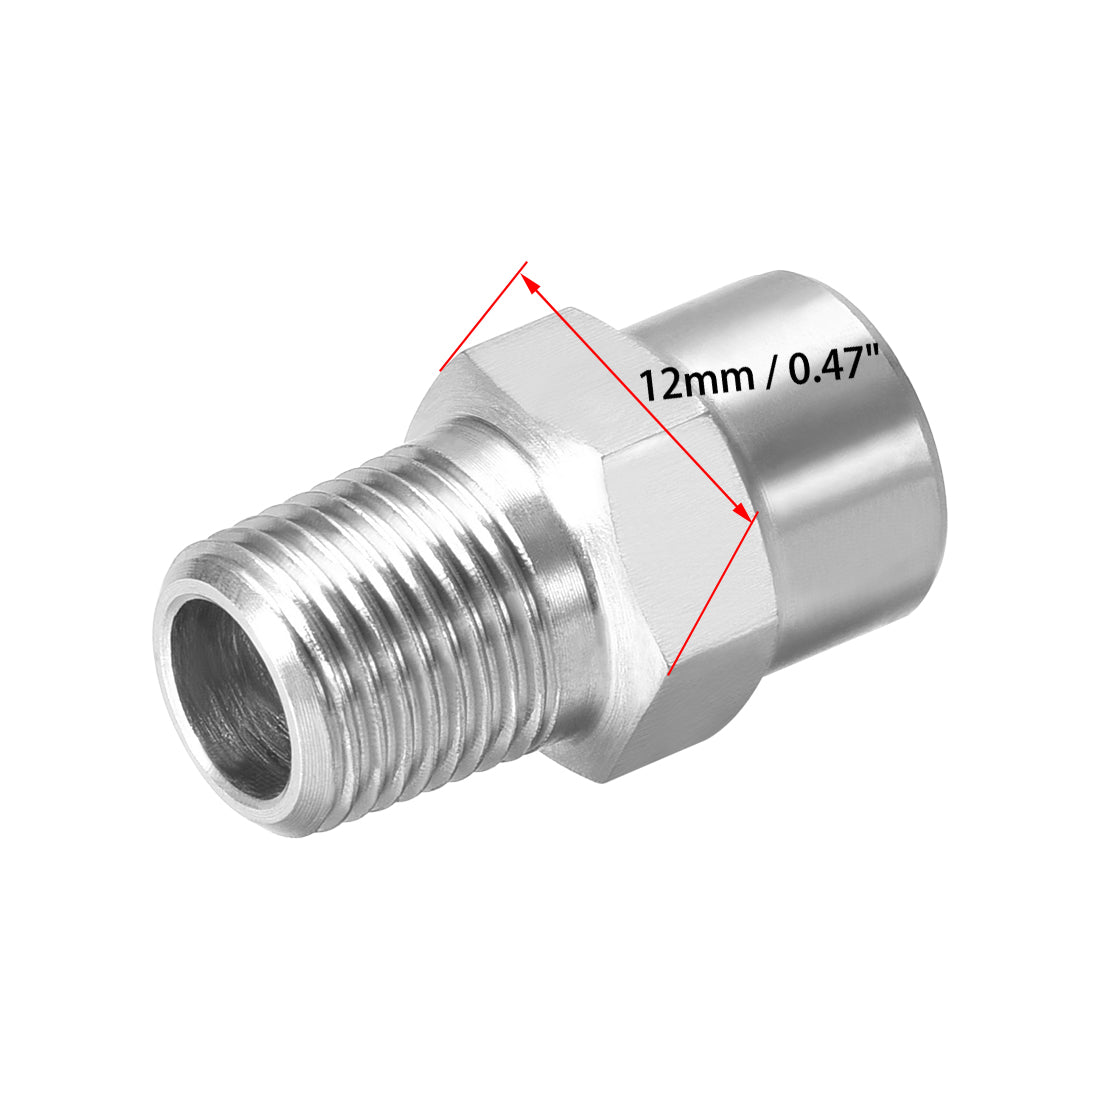 Uxcell Uxcell Flat Fan Spray Tip - 1/8BSPT Male Thread 304 Stainless Steel Nozzle - 65 Degree 2mm Orifice Diameter - 2 Pcs